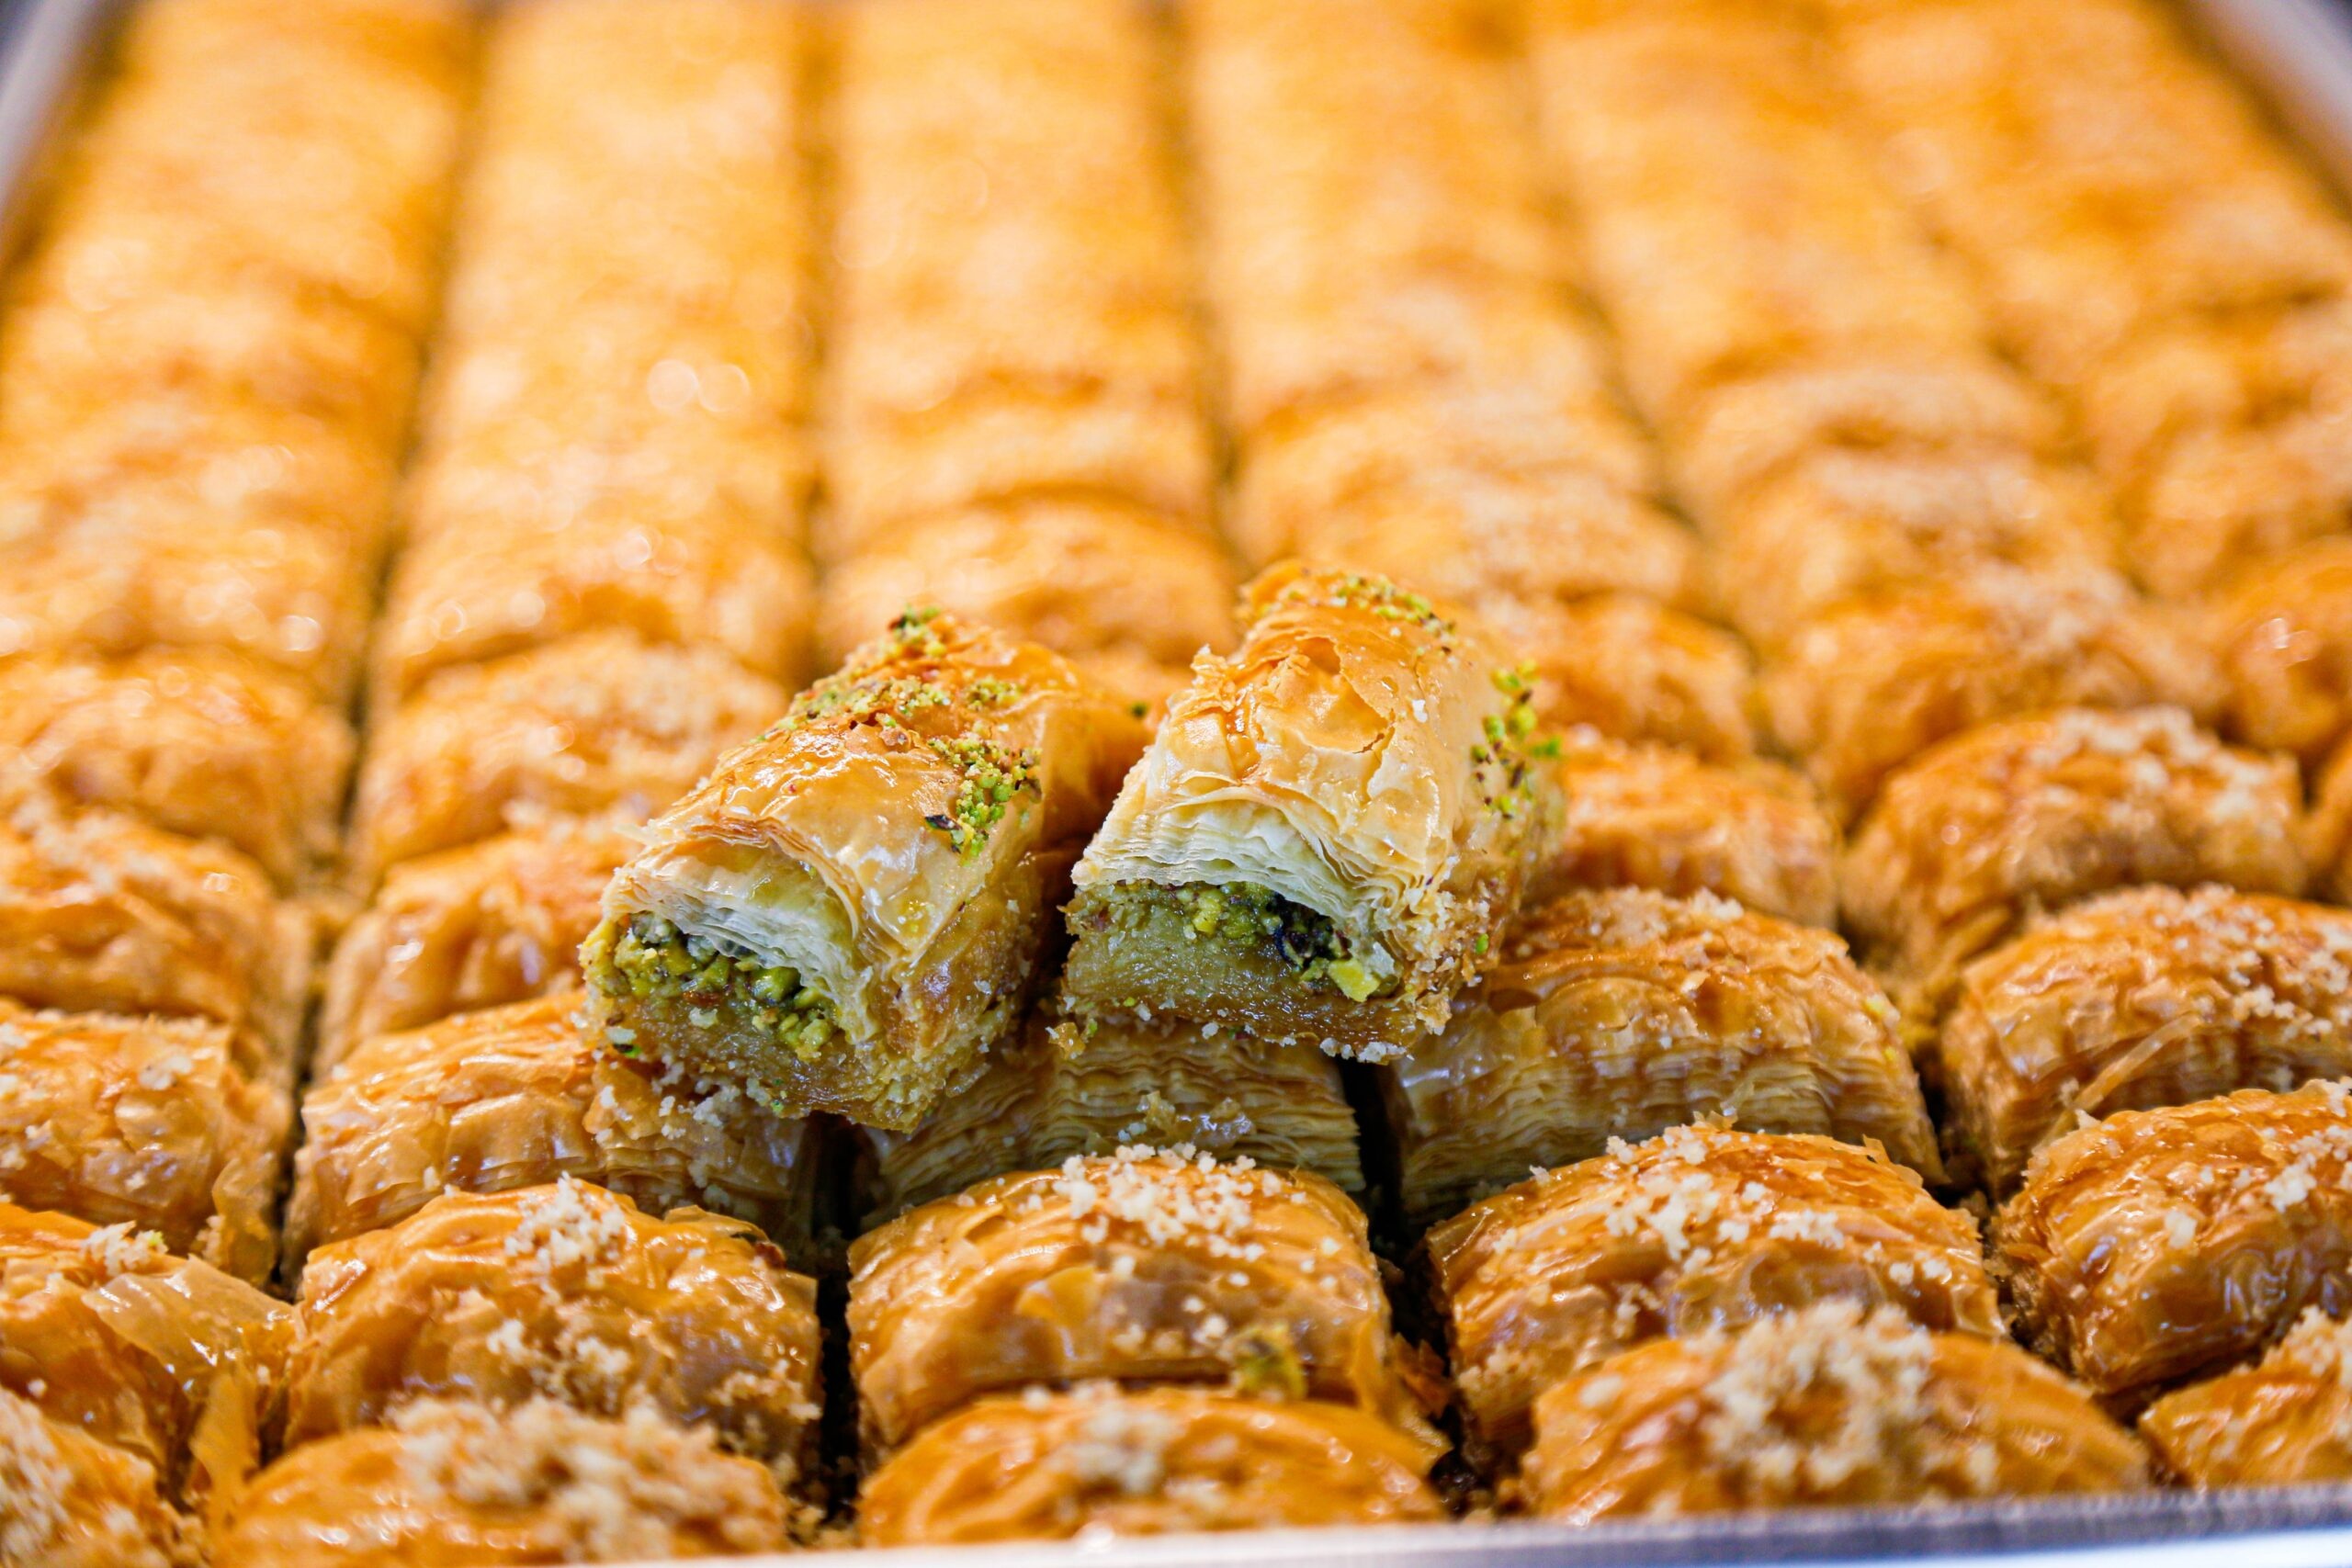 Baklava: Layers of filo sweetened and held together with syrup or honey. 2560x1710 HD Wallpaper.